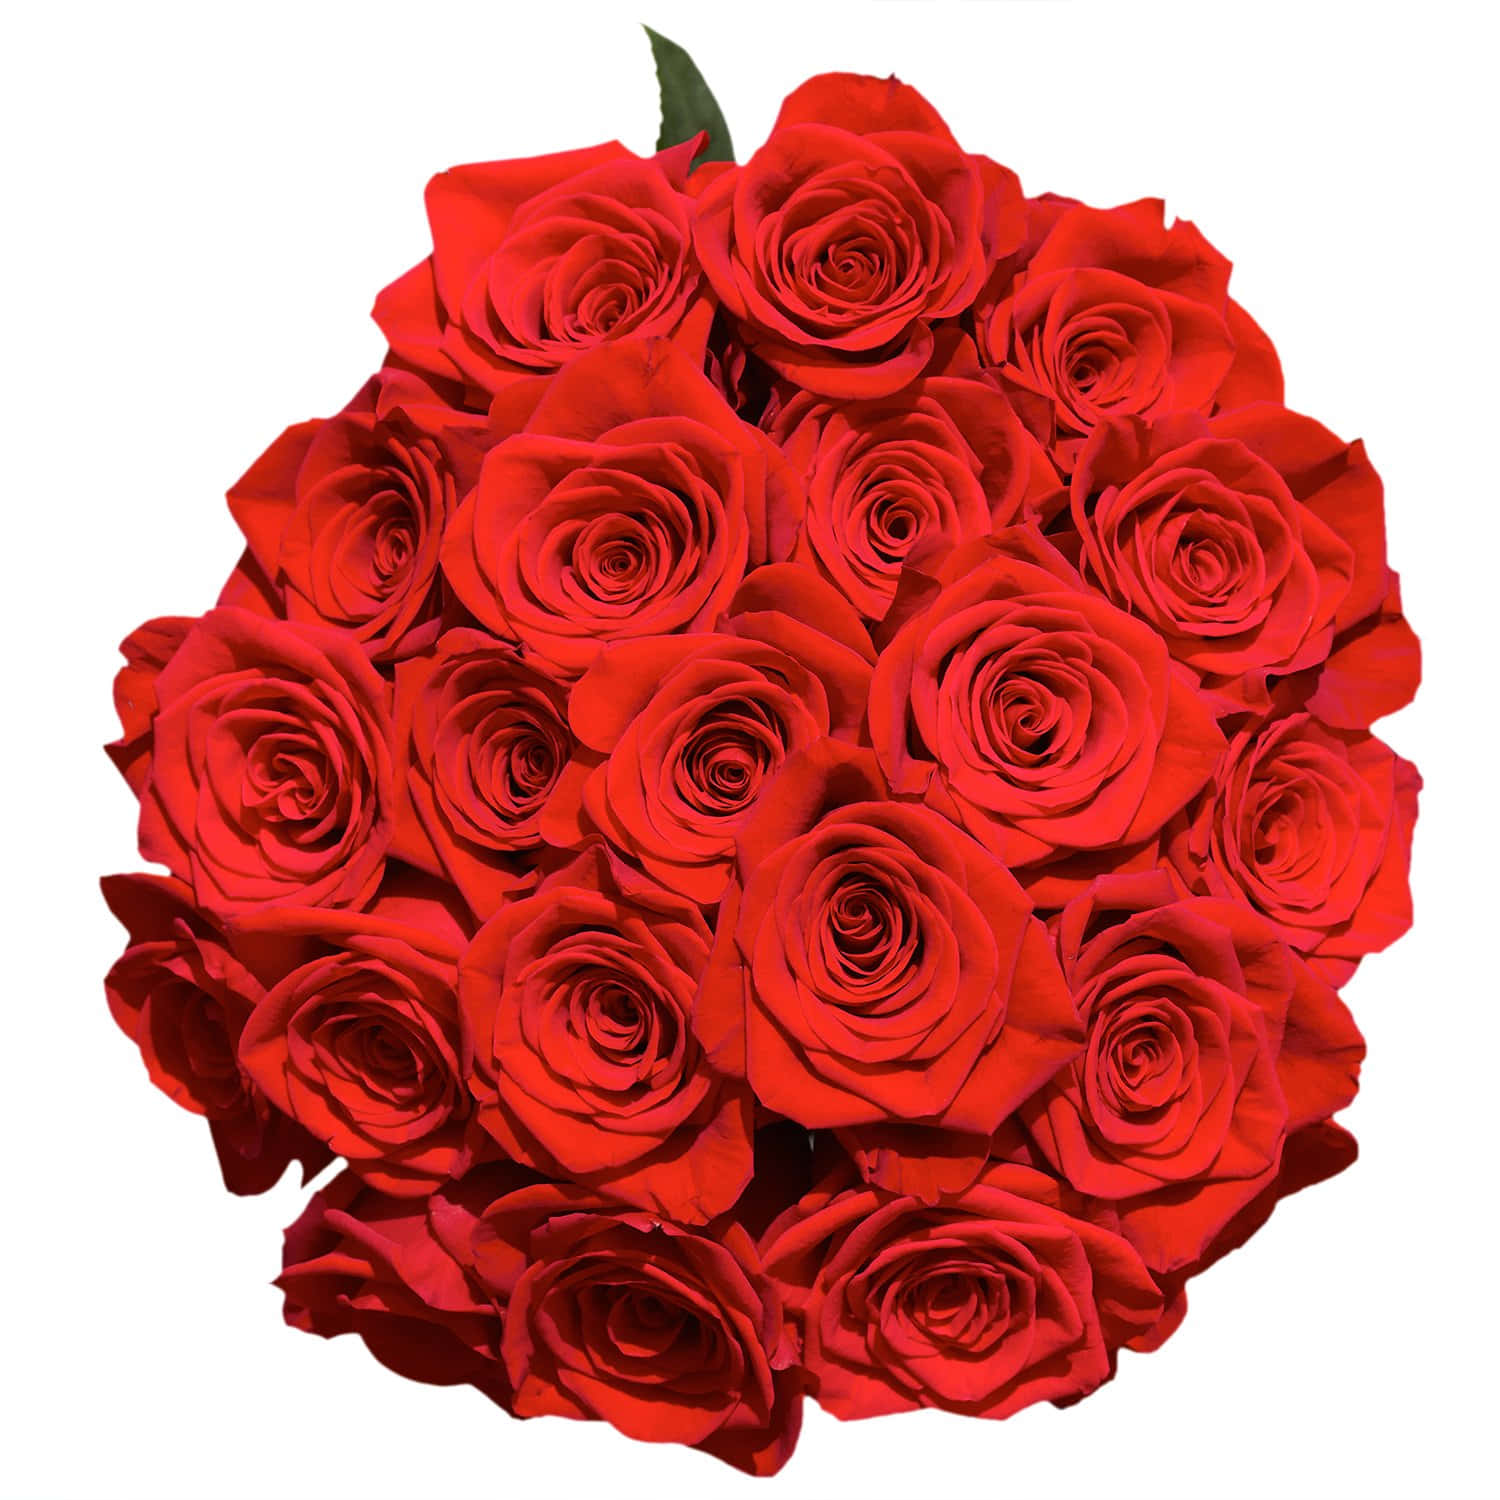 Beautiful Roses Red Flower Round Bouquet Picture